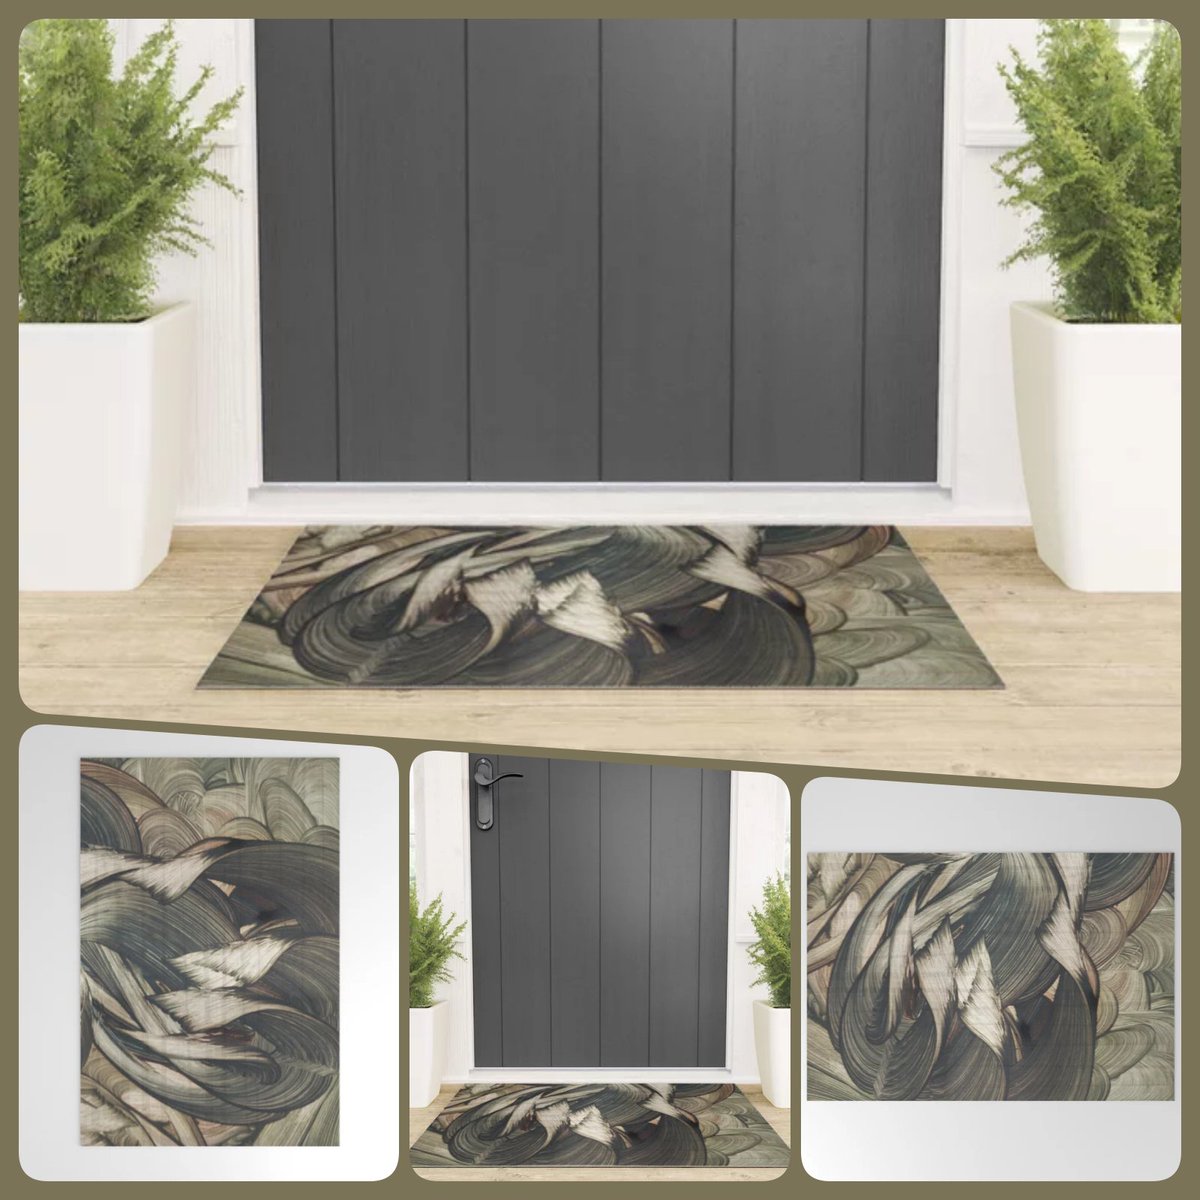 Airmed Welcome Mat ~by Art_Falaxy ~Refreshingly Unique~ #artfalaxy #art #rugs #mats #homedecor #society6 #Society6max #swirls #modern #trendy #accents #floorrugs #welcome #outdoorrugs #white #black #gray #brown #beige society6.com/product/airmed…